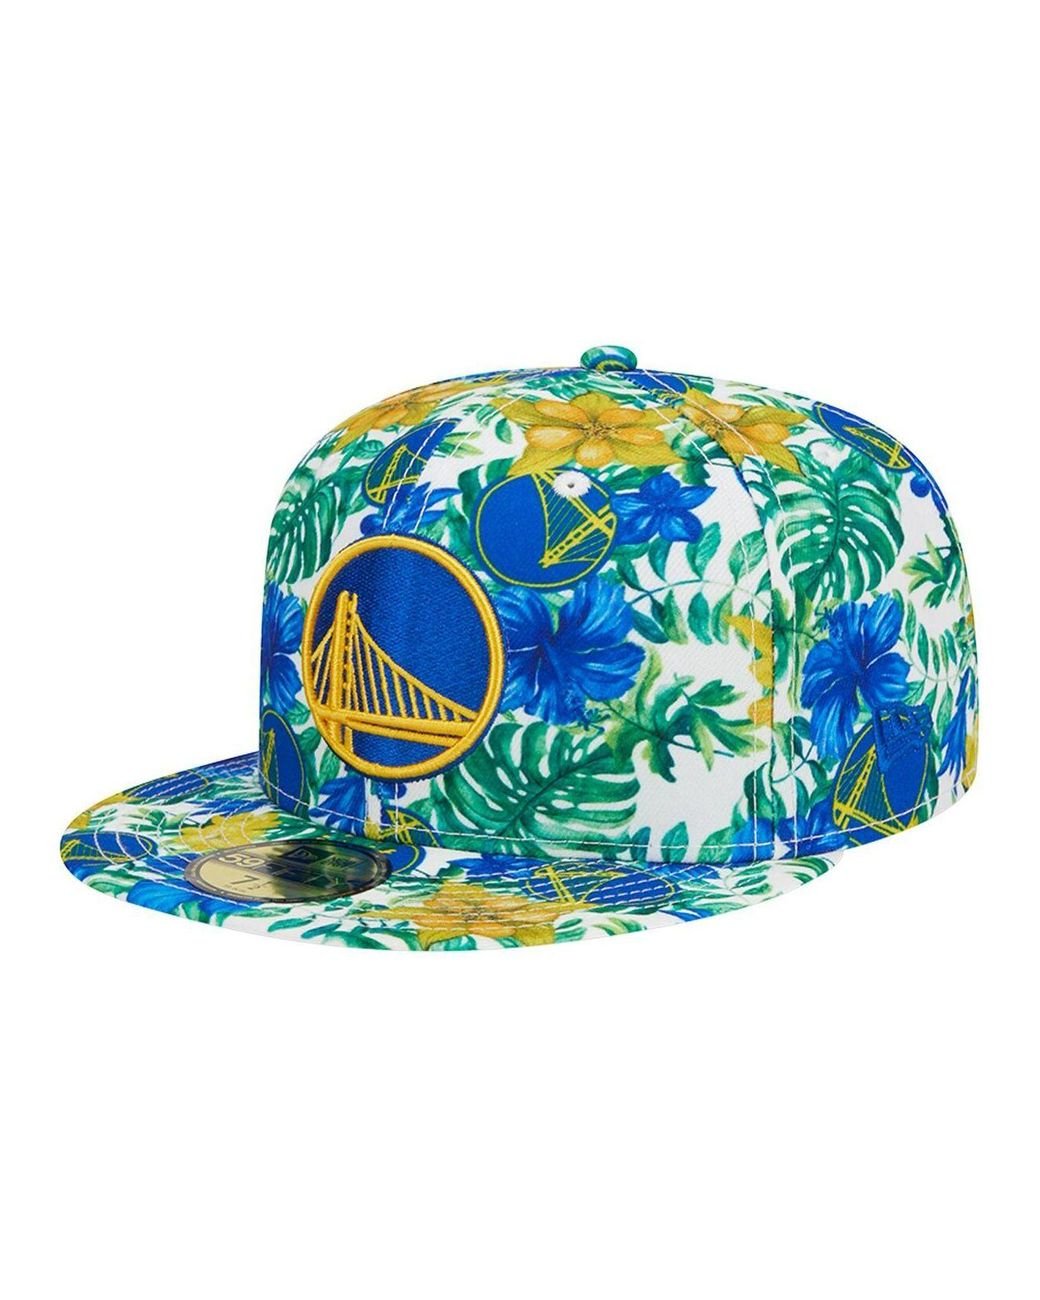 Golden State Warriors x Just Don 59FIFTY Fitted | New Era